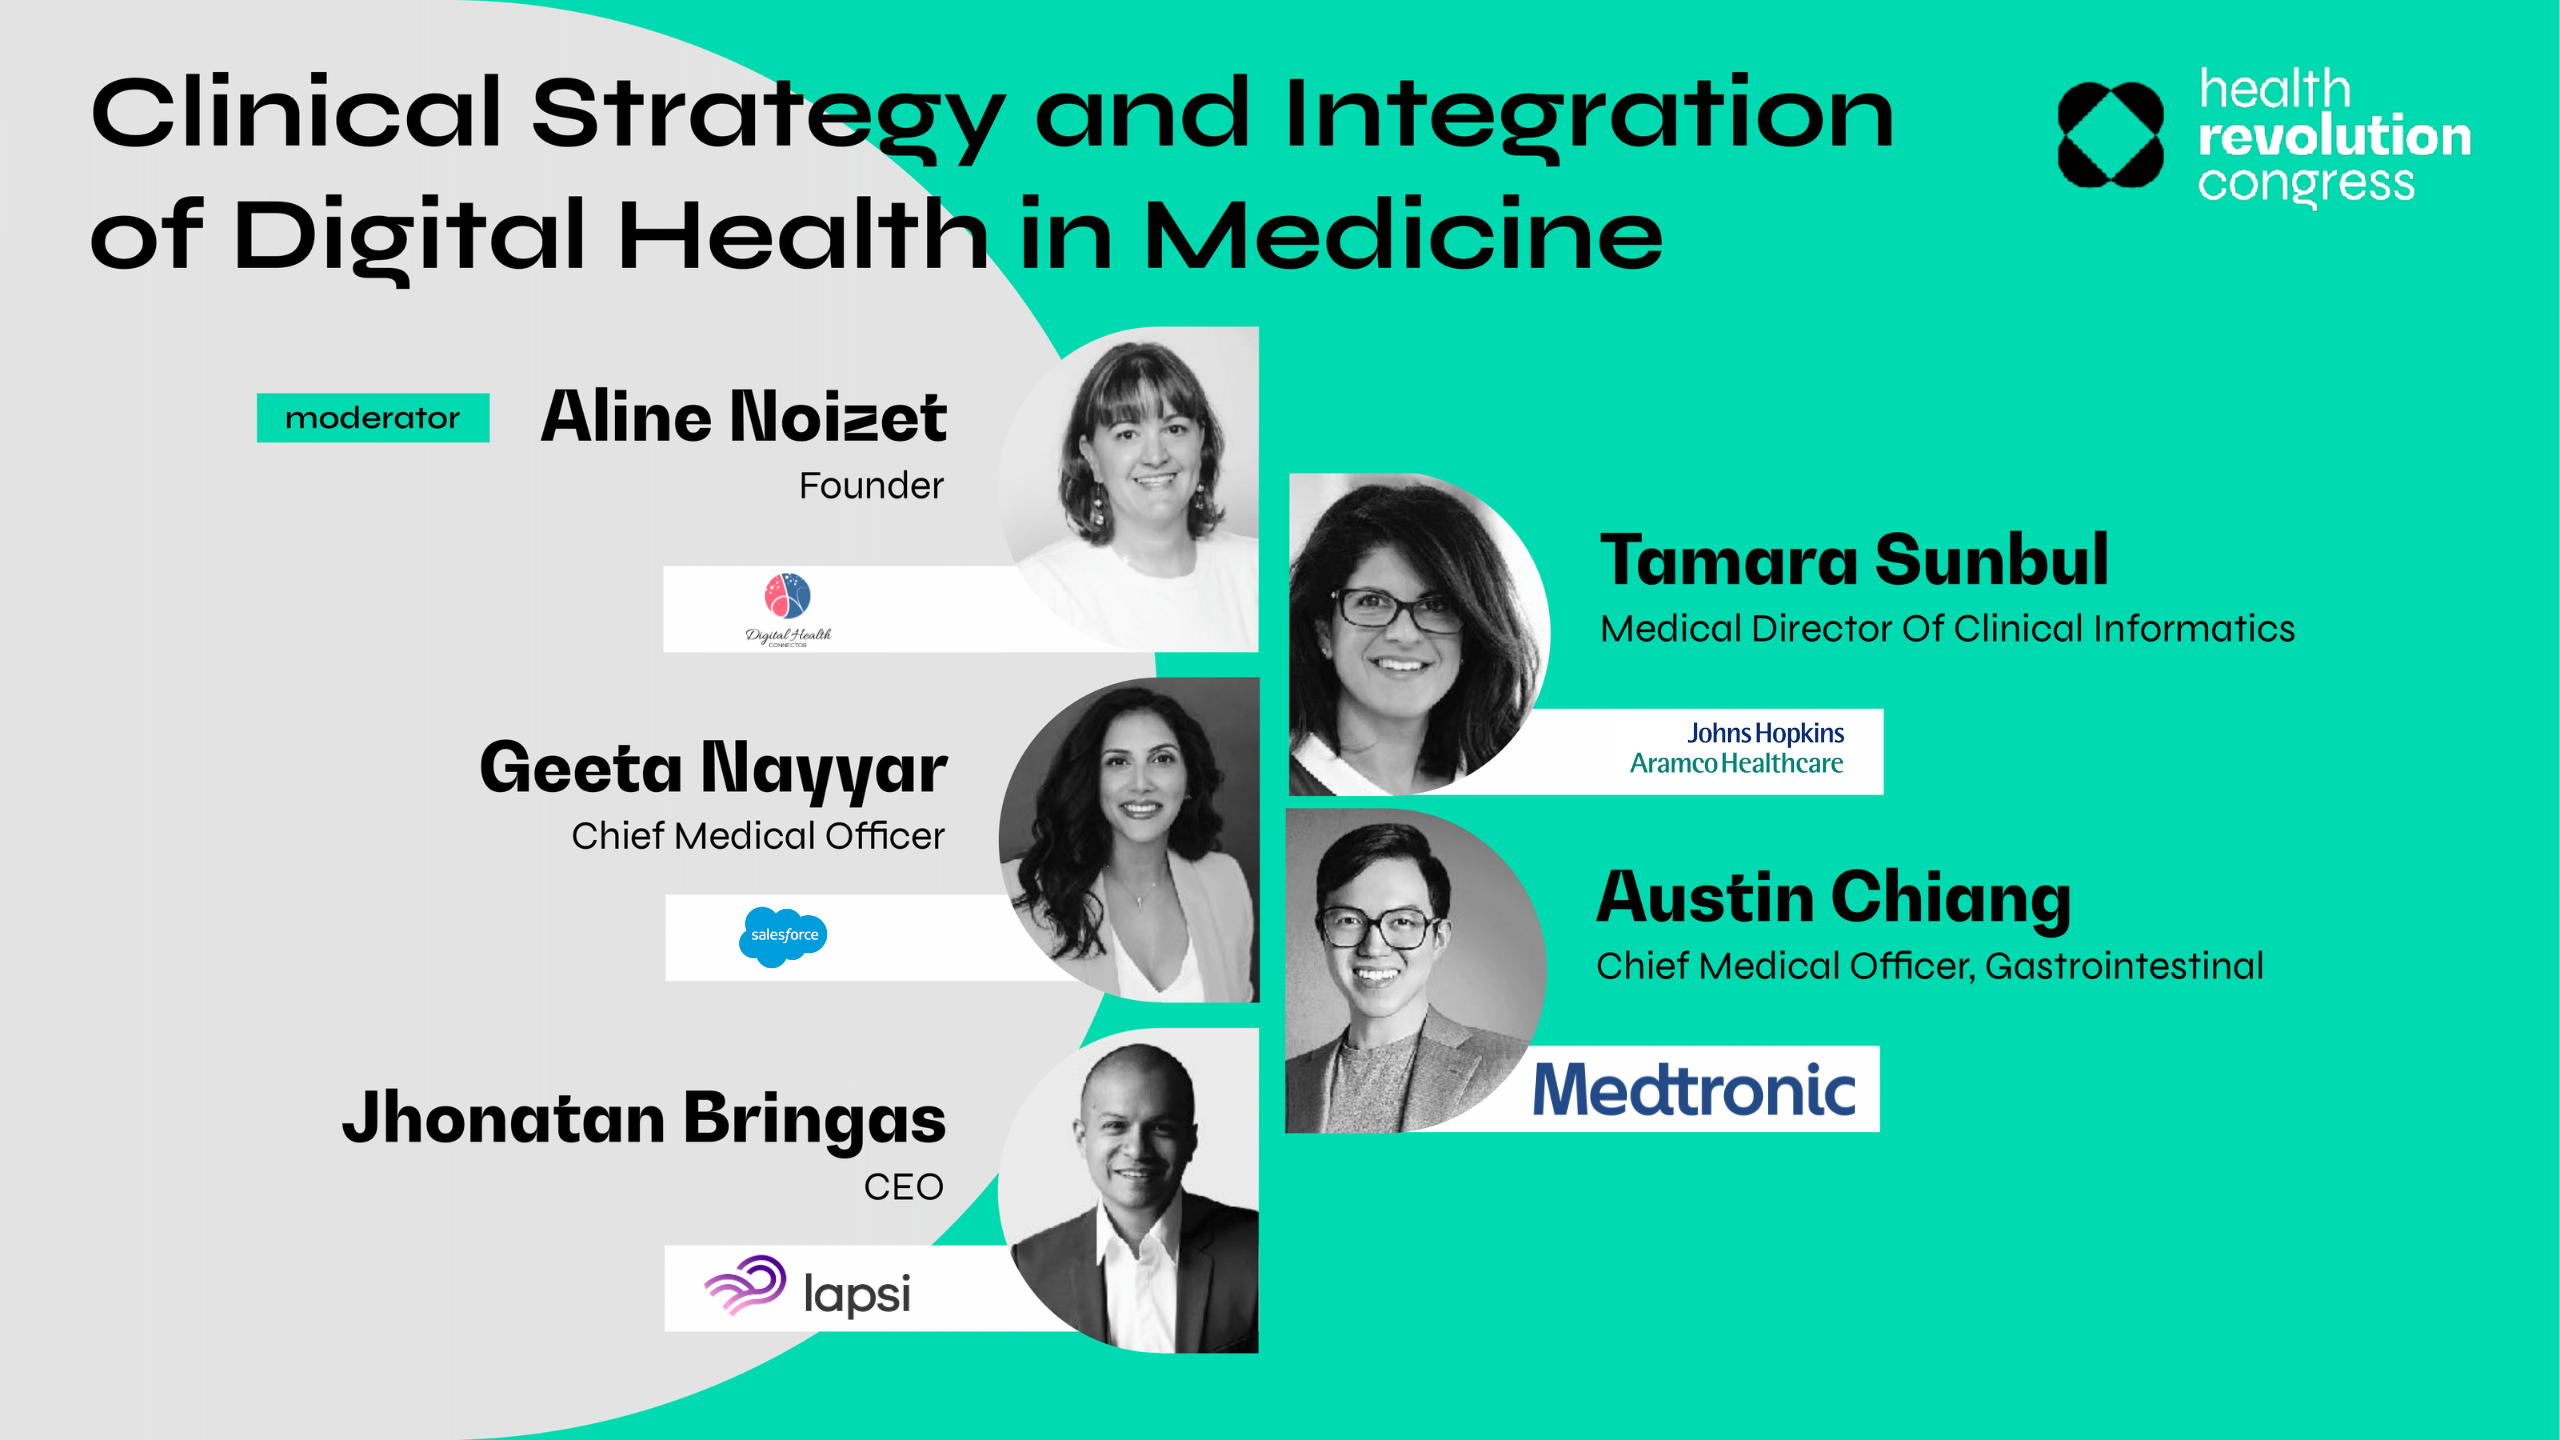 Find out more about “Clinical Strategy and Integration of Digital Health in Medicine” at the Health Revolution Congress